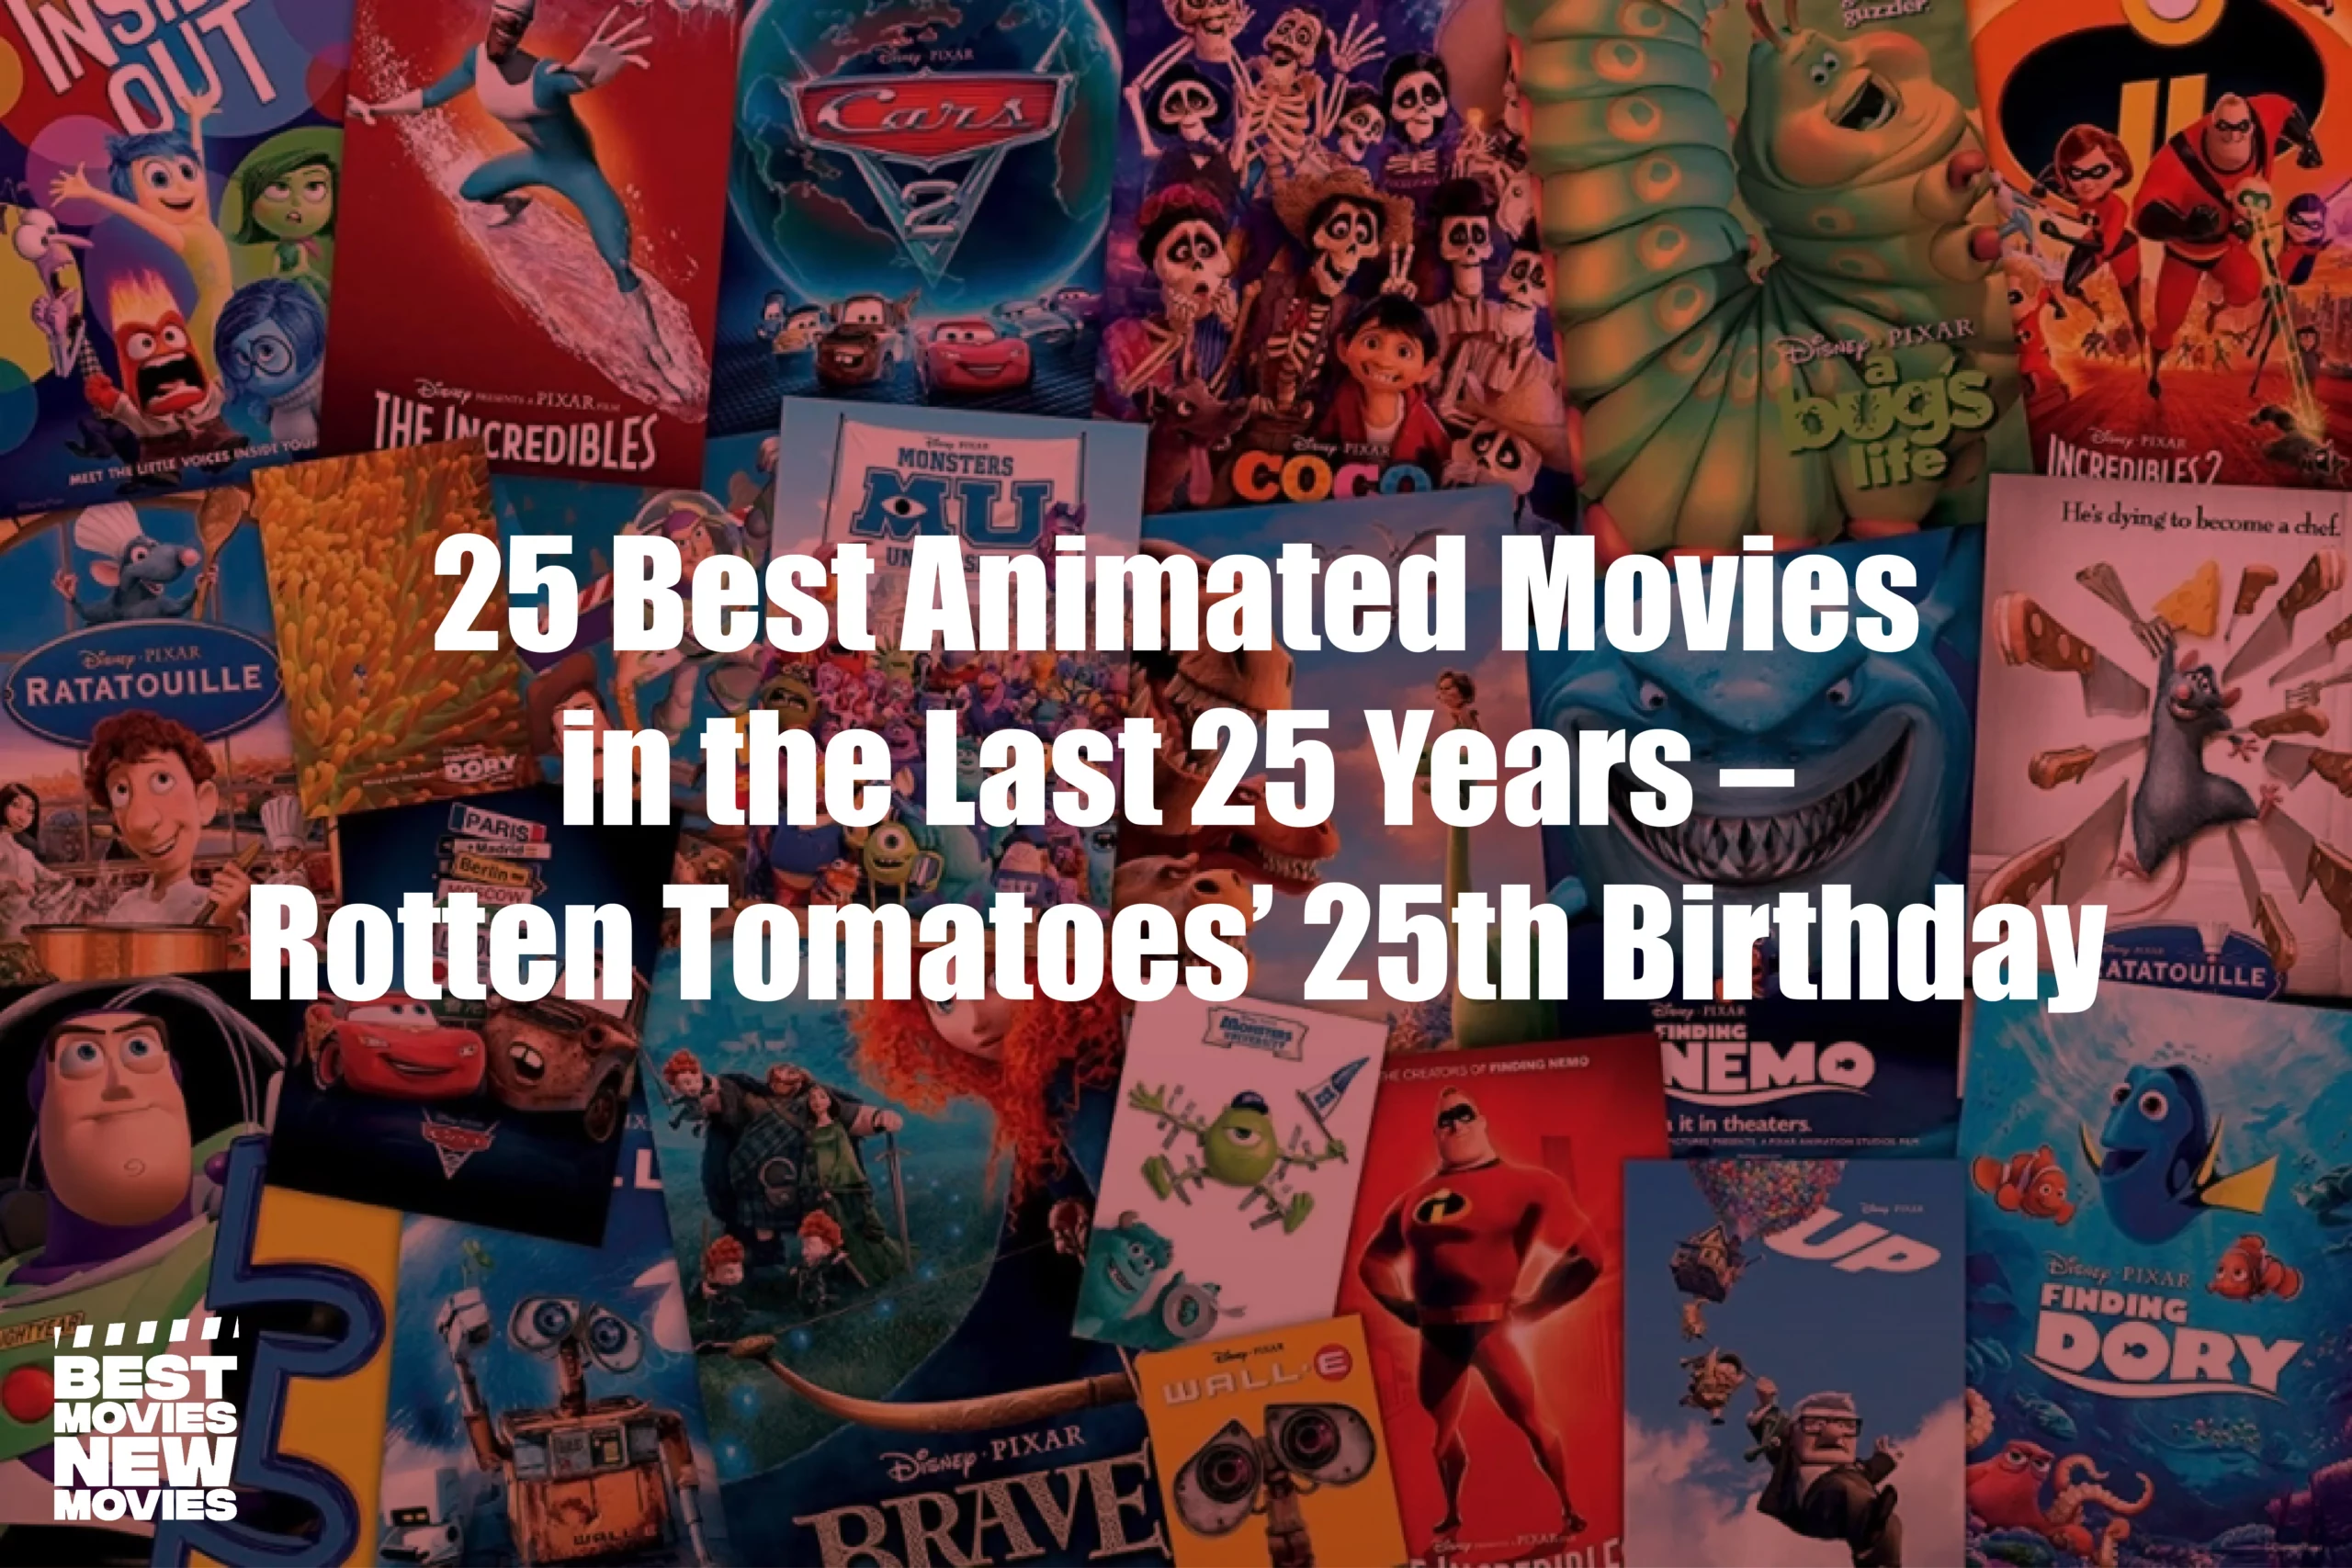 25 Best Animated Movies in the Last 25 Years – Rotten Tomatoes’ 25th Birthday